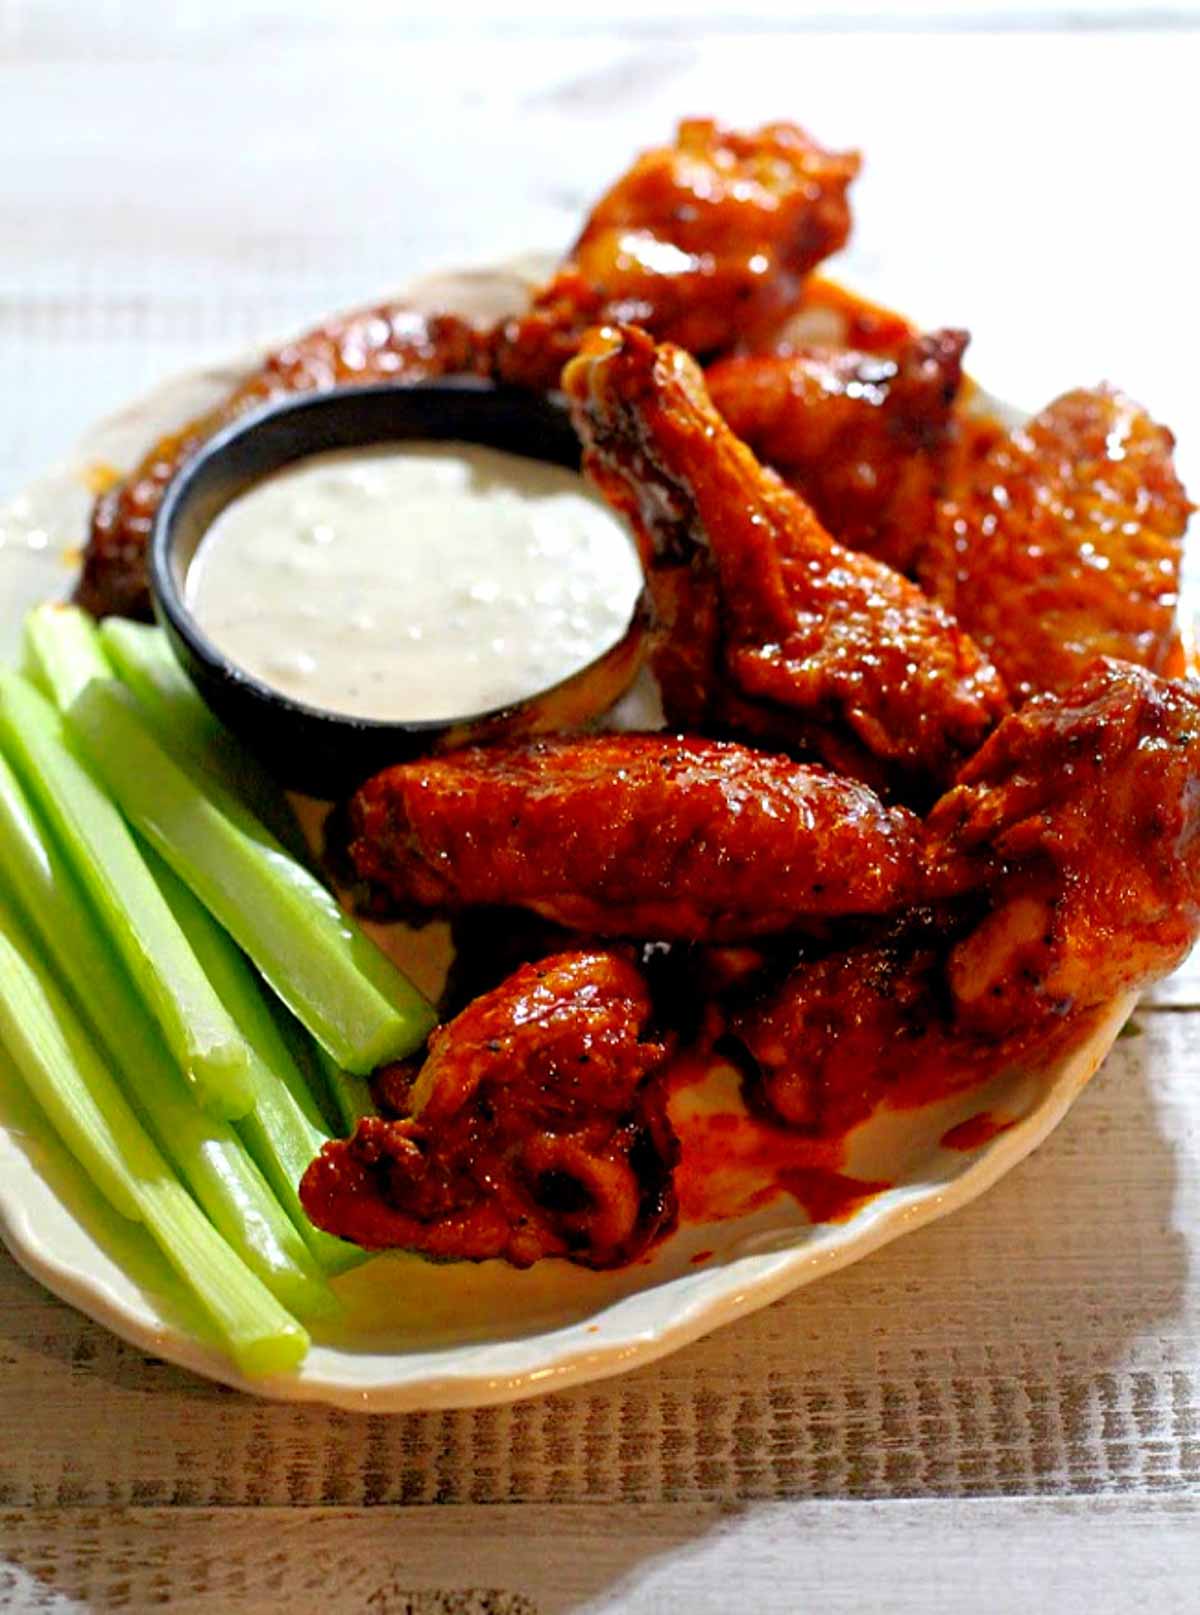 crispy baked wings with celery sticks and ranch dressing.